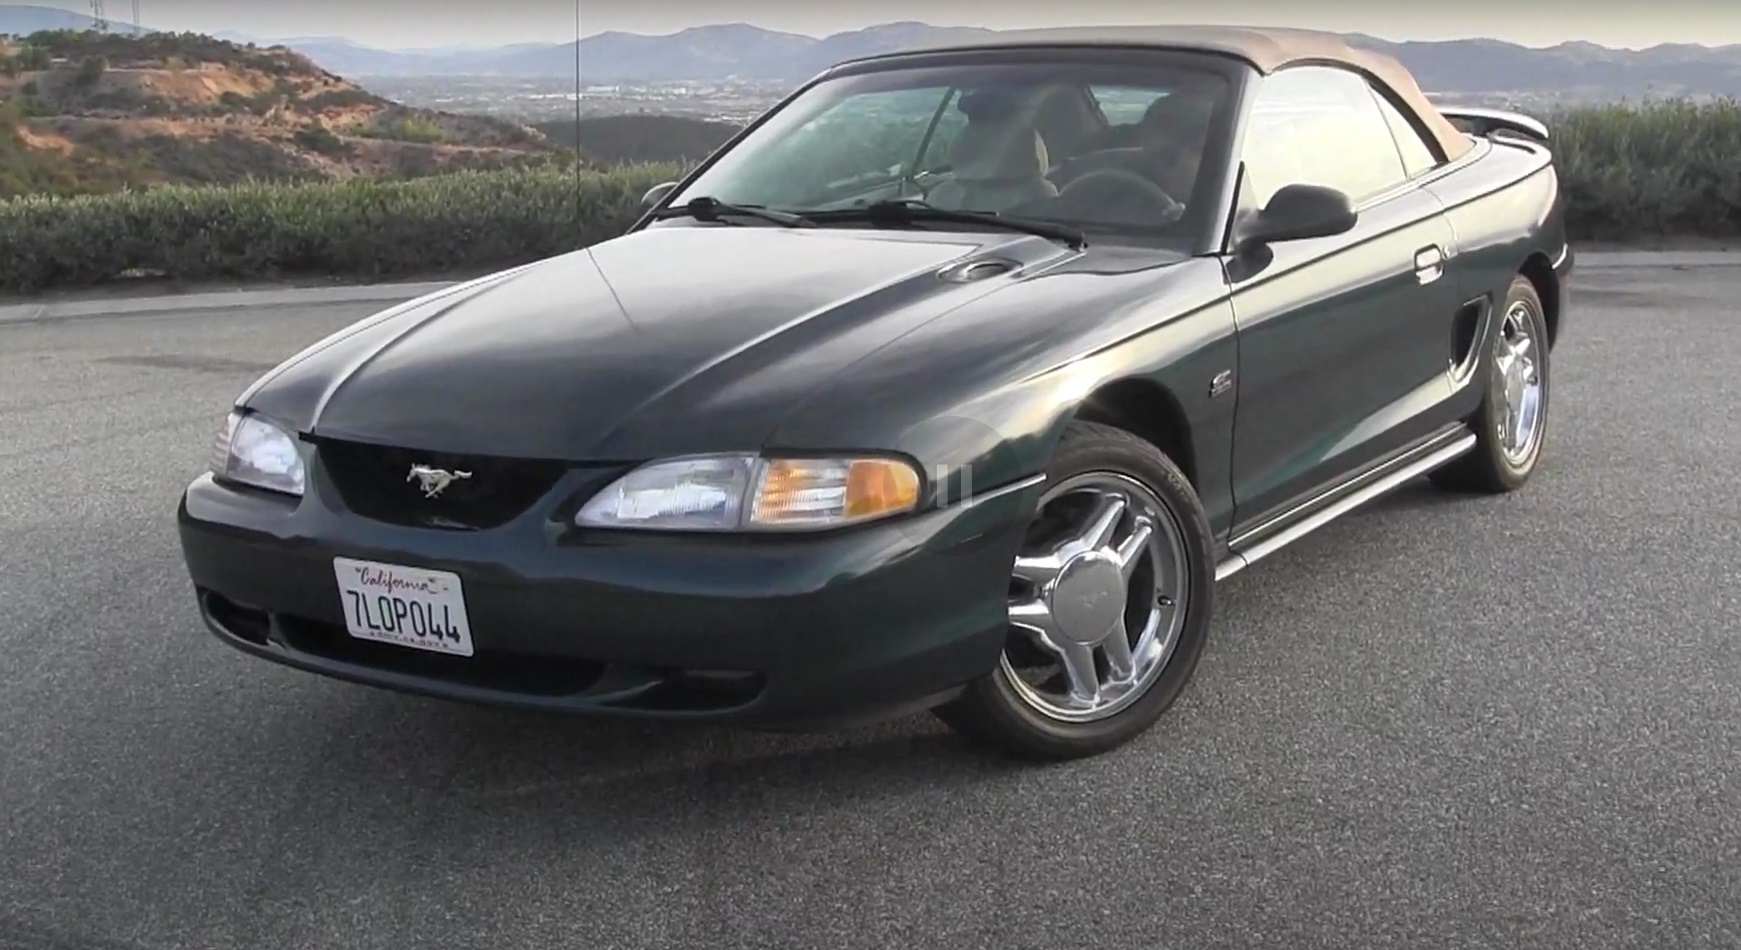 Video: 1994 Ford Mustang GT Walkaround + Overview